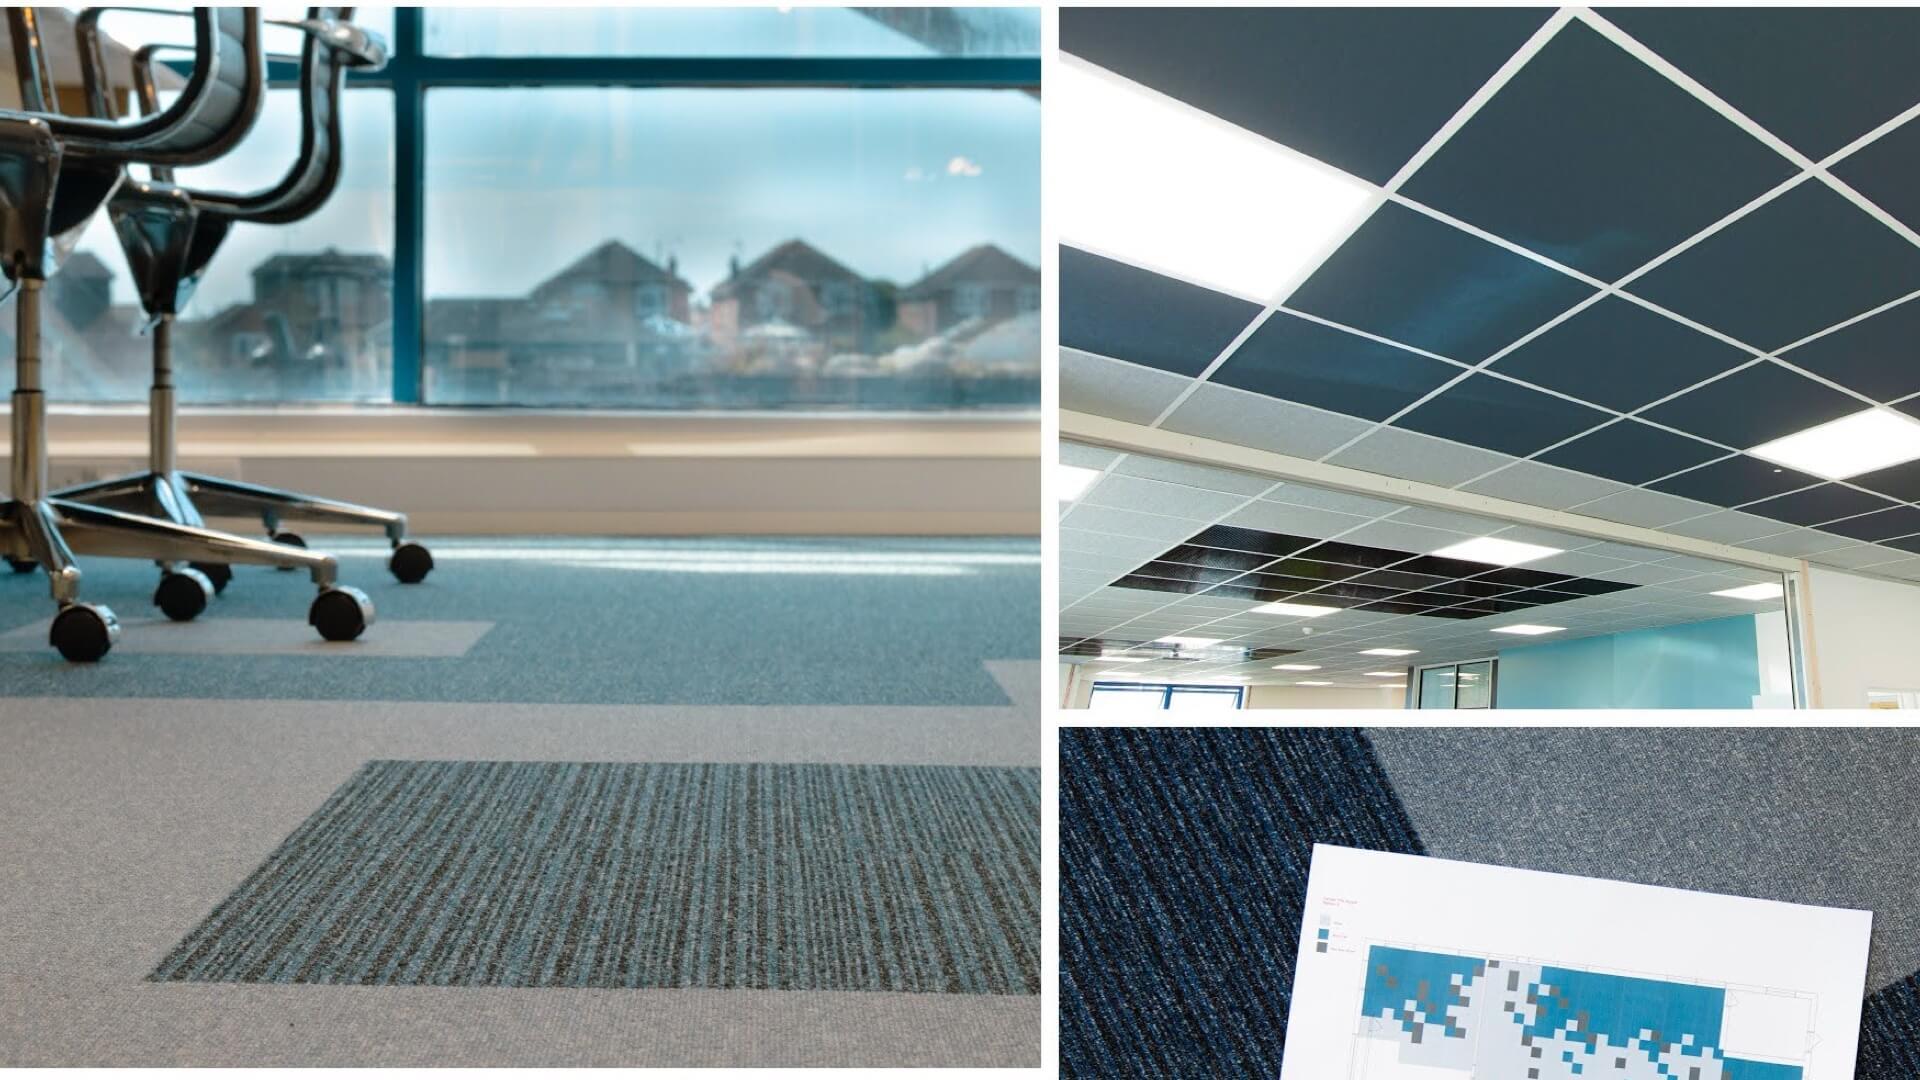 A collage of floor and ceiling tiles